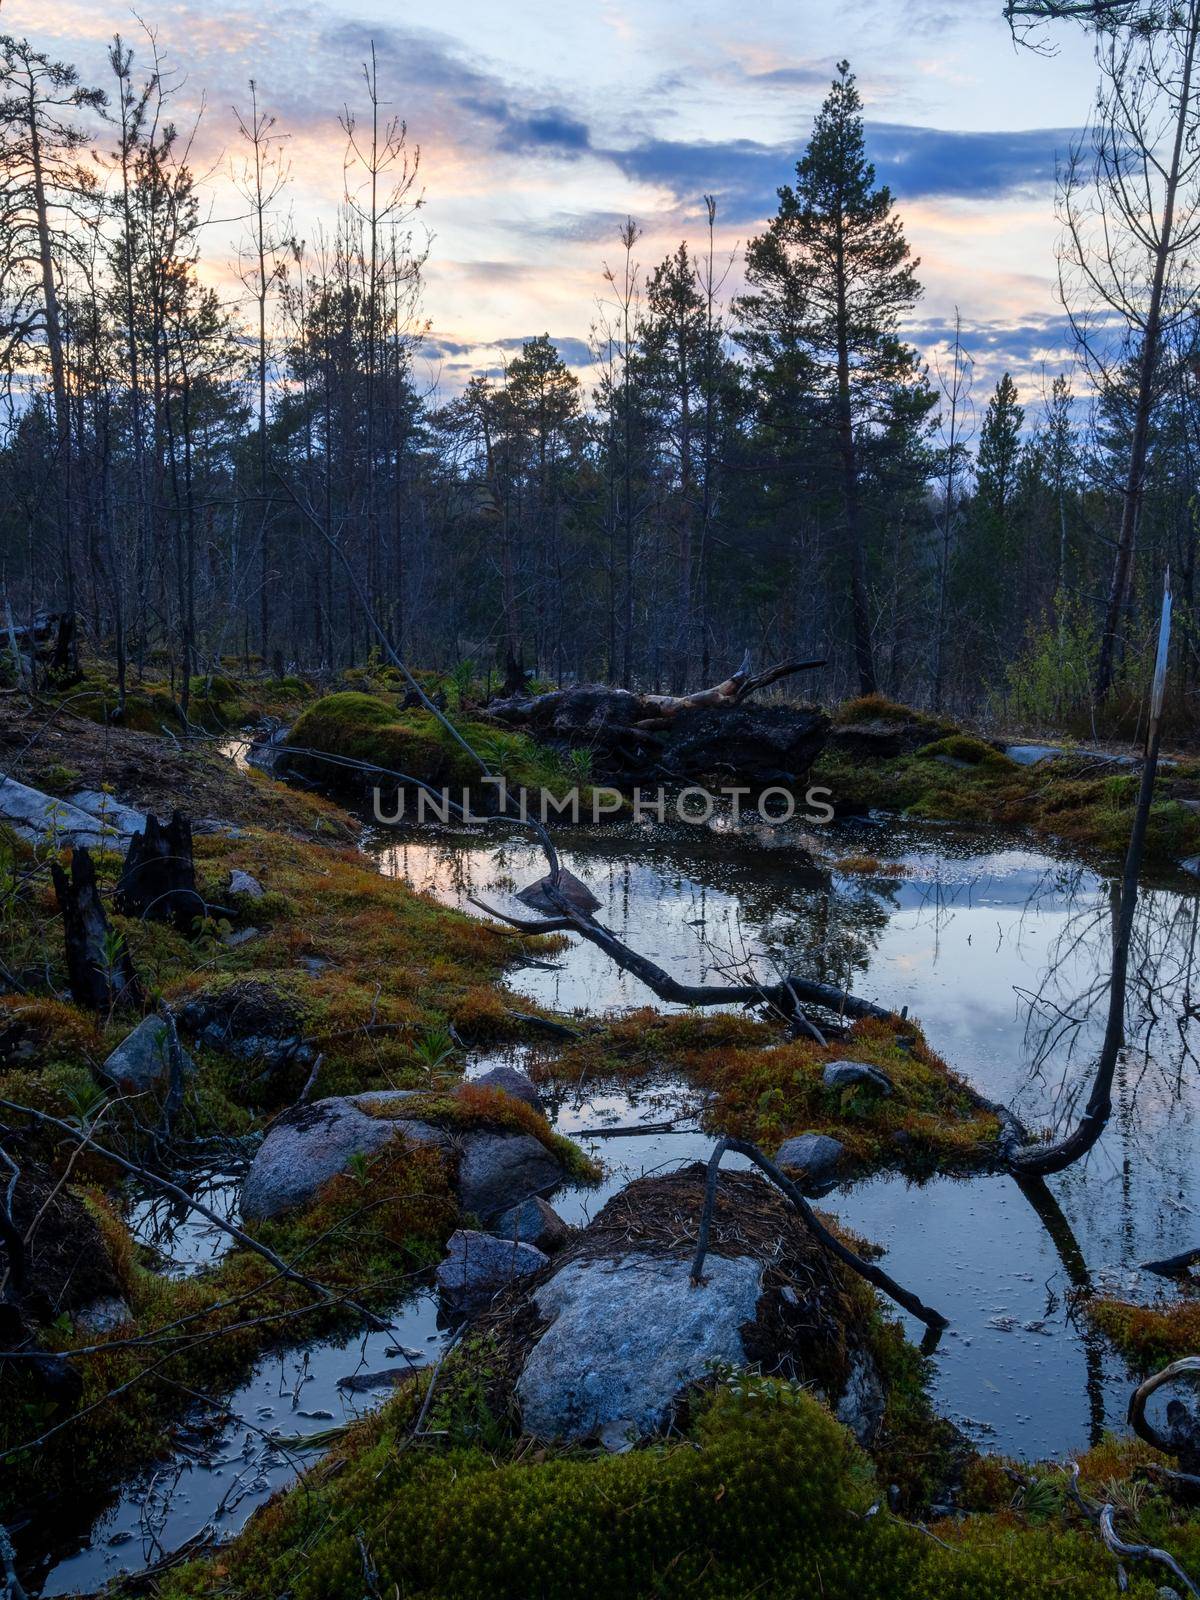 Landscape of the Karelian forest. Two stumps by a small lake in the forest on a rocky massif